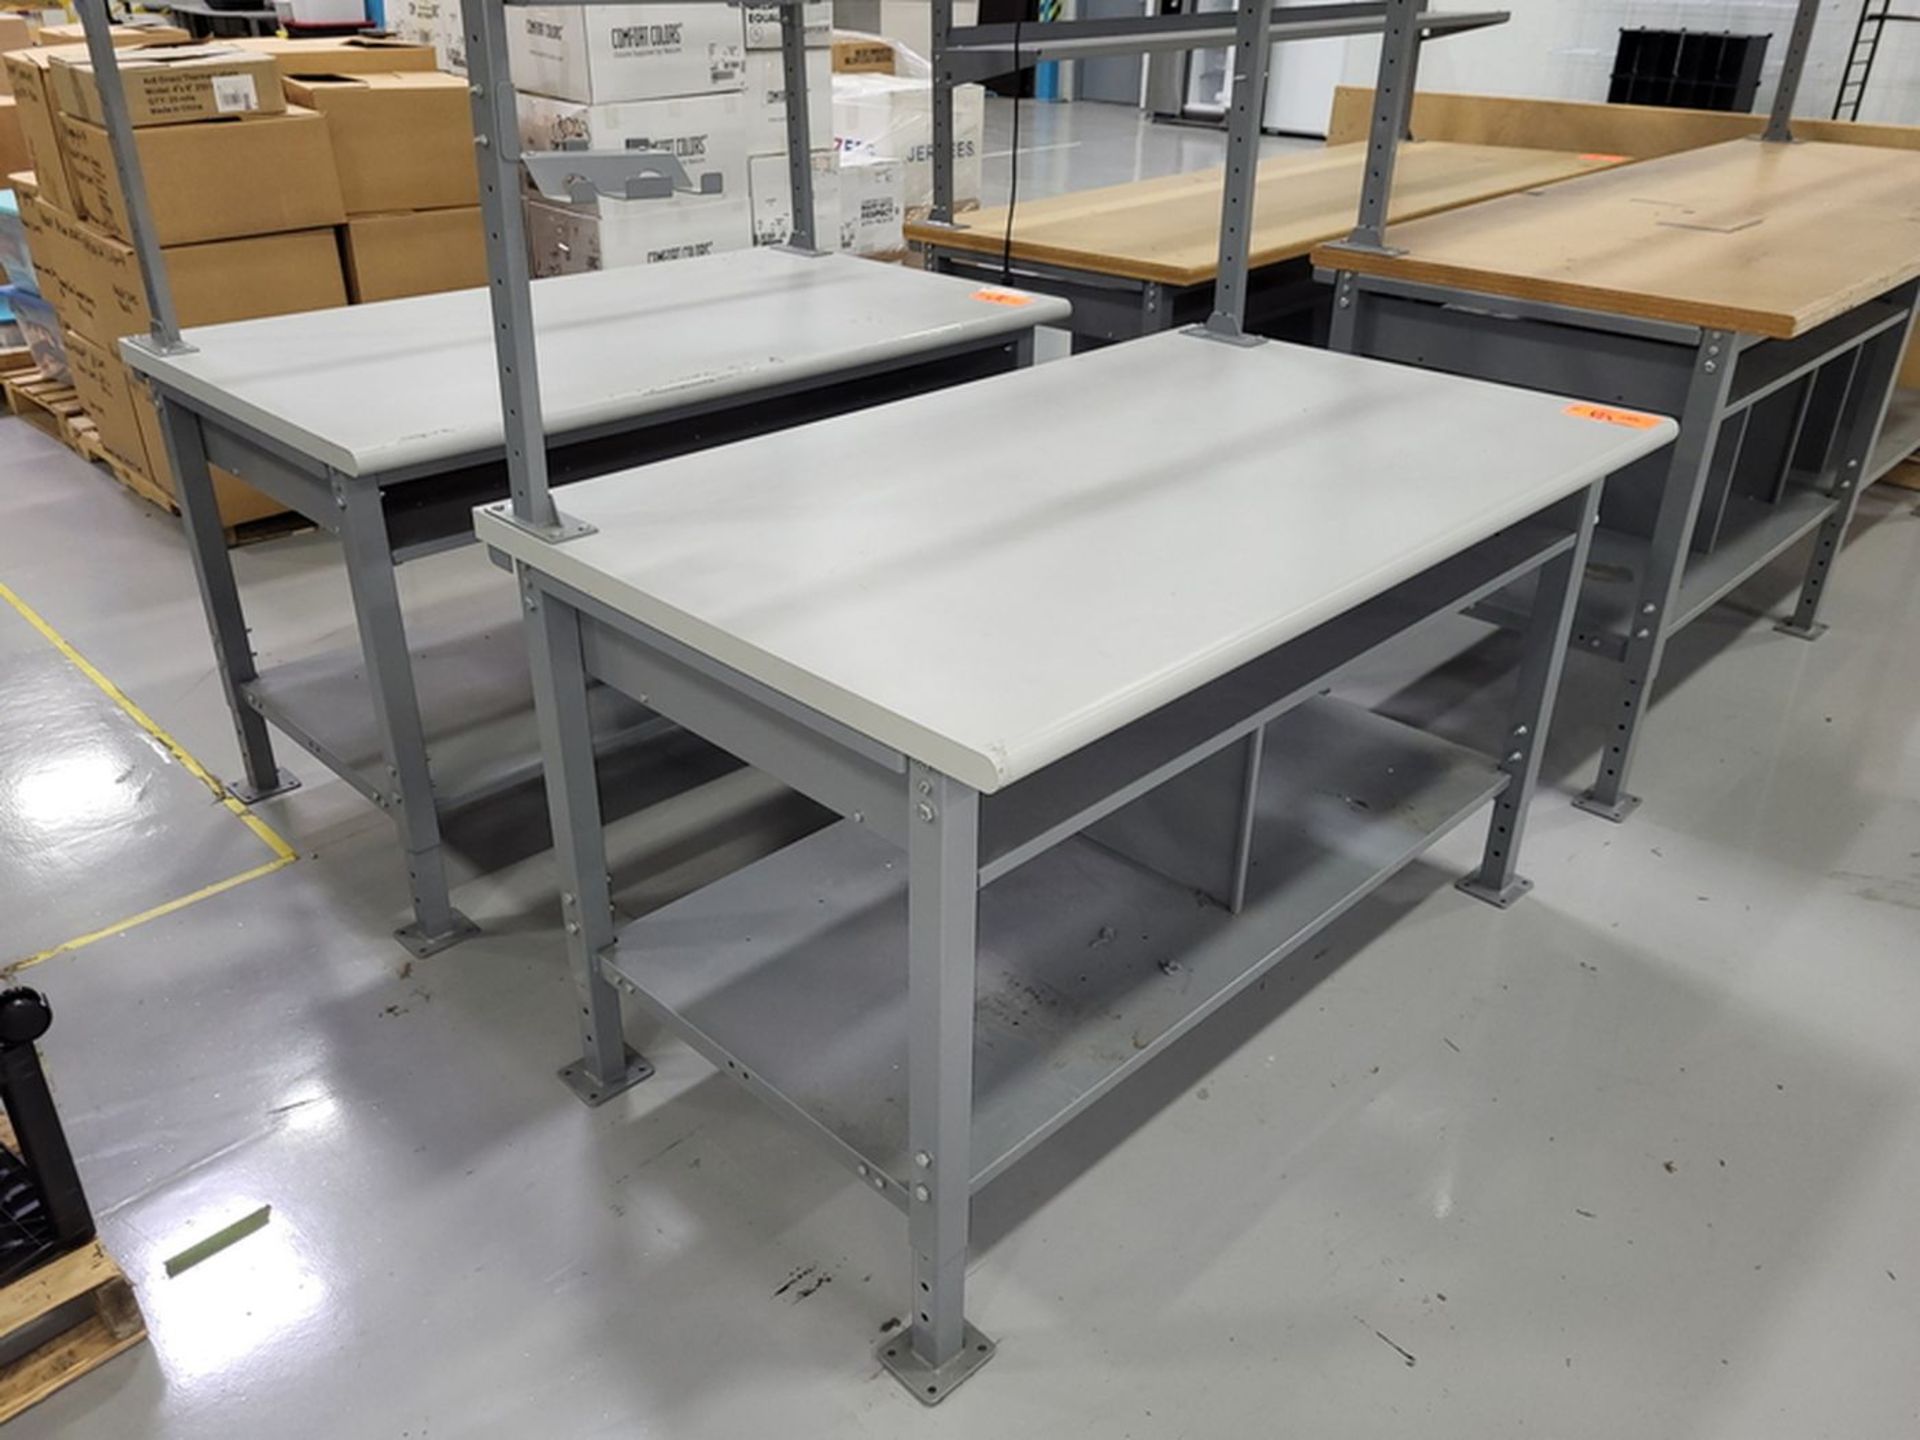 Lot - (2) 5 ft. x 3 ft. Laminate Work Tables; Includes Overhead Support